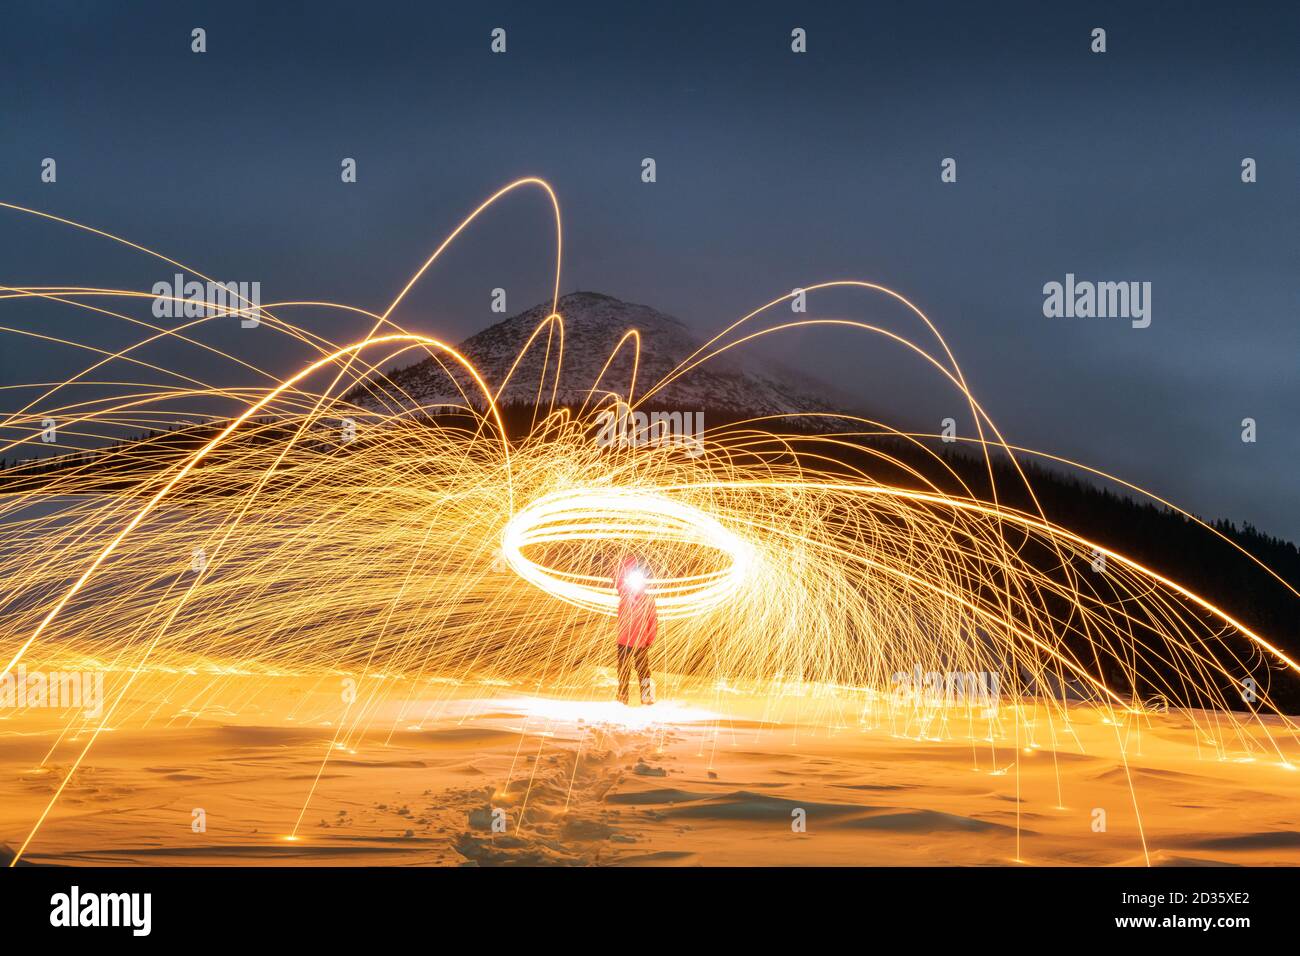 Fire show with lot of sparks in night winter mountains. Landscape photography Stock Photo